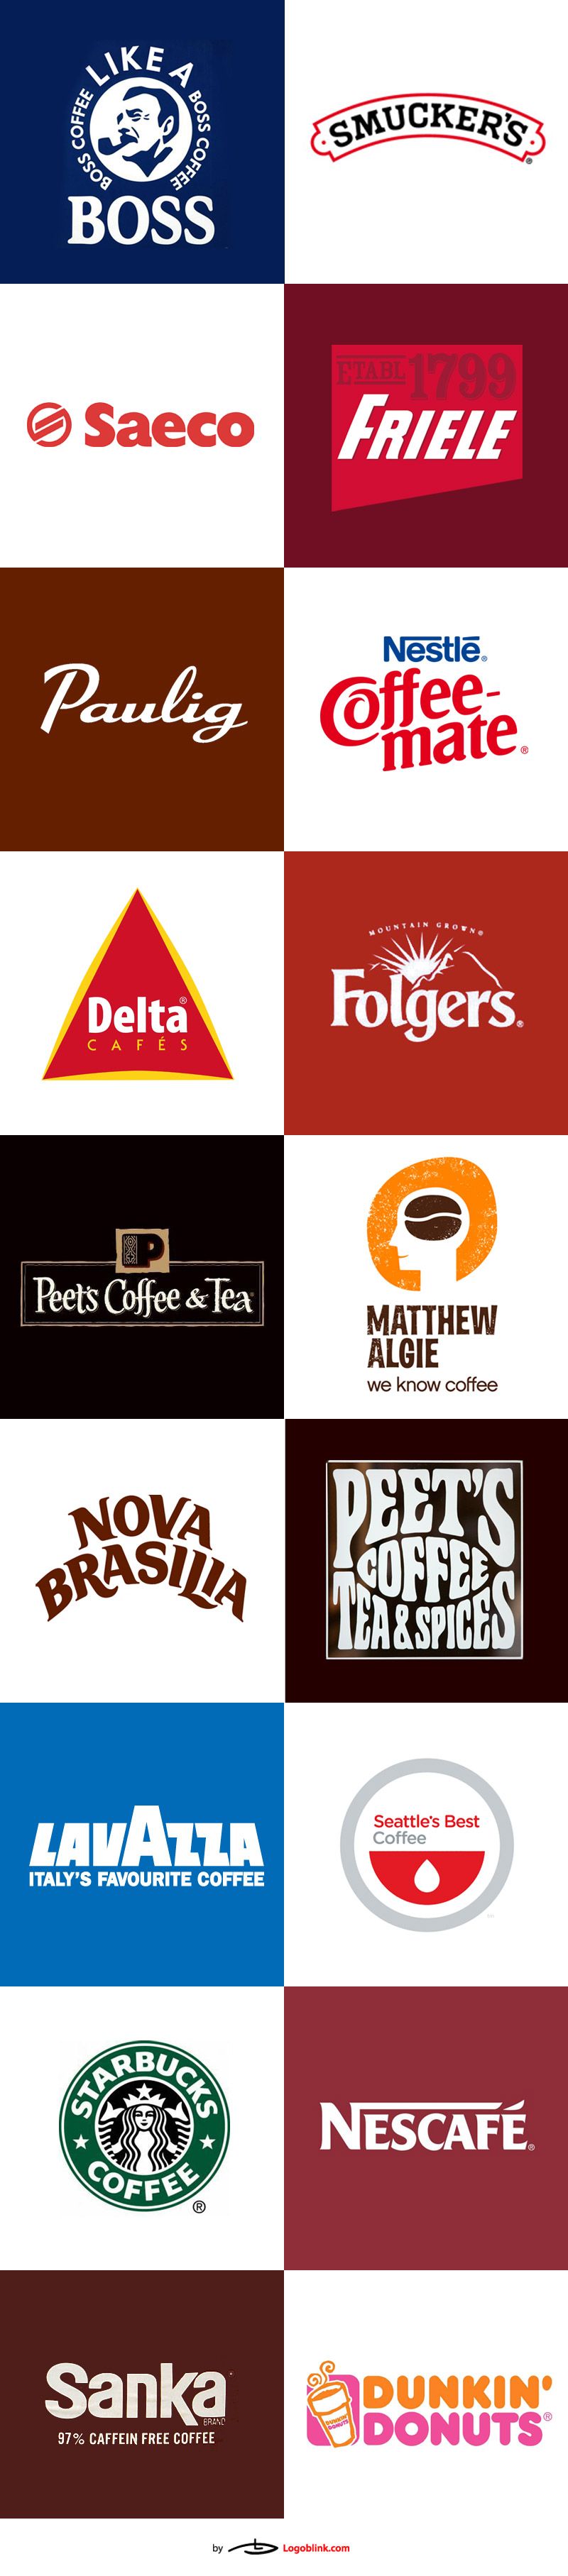 36 Famous coffee logos from around the world - Logoblink.com